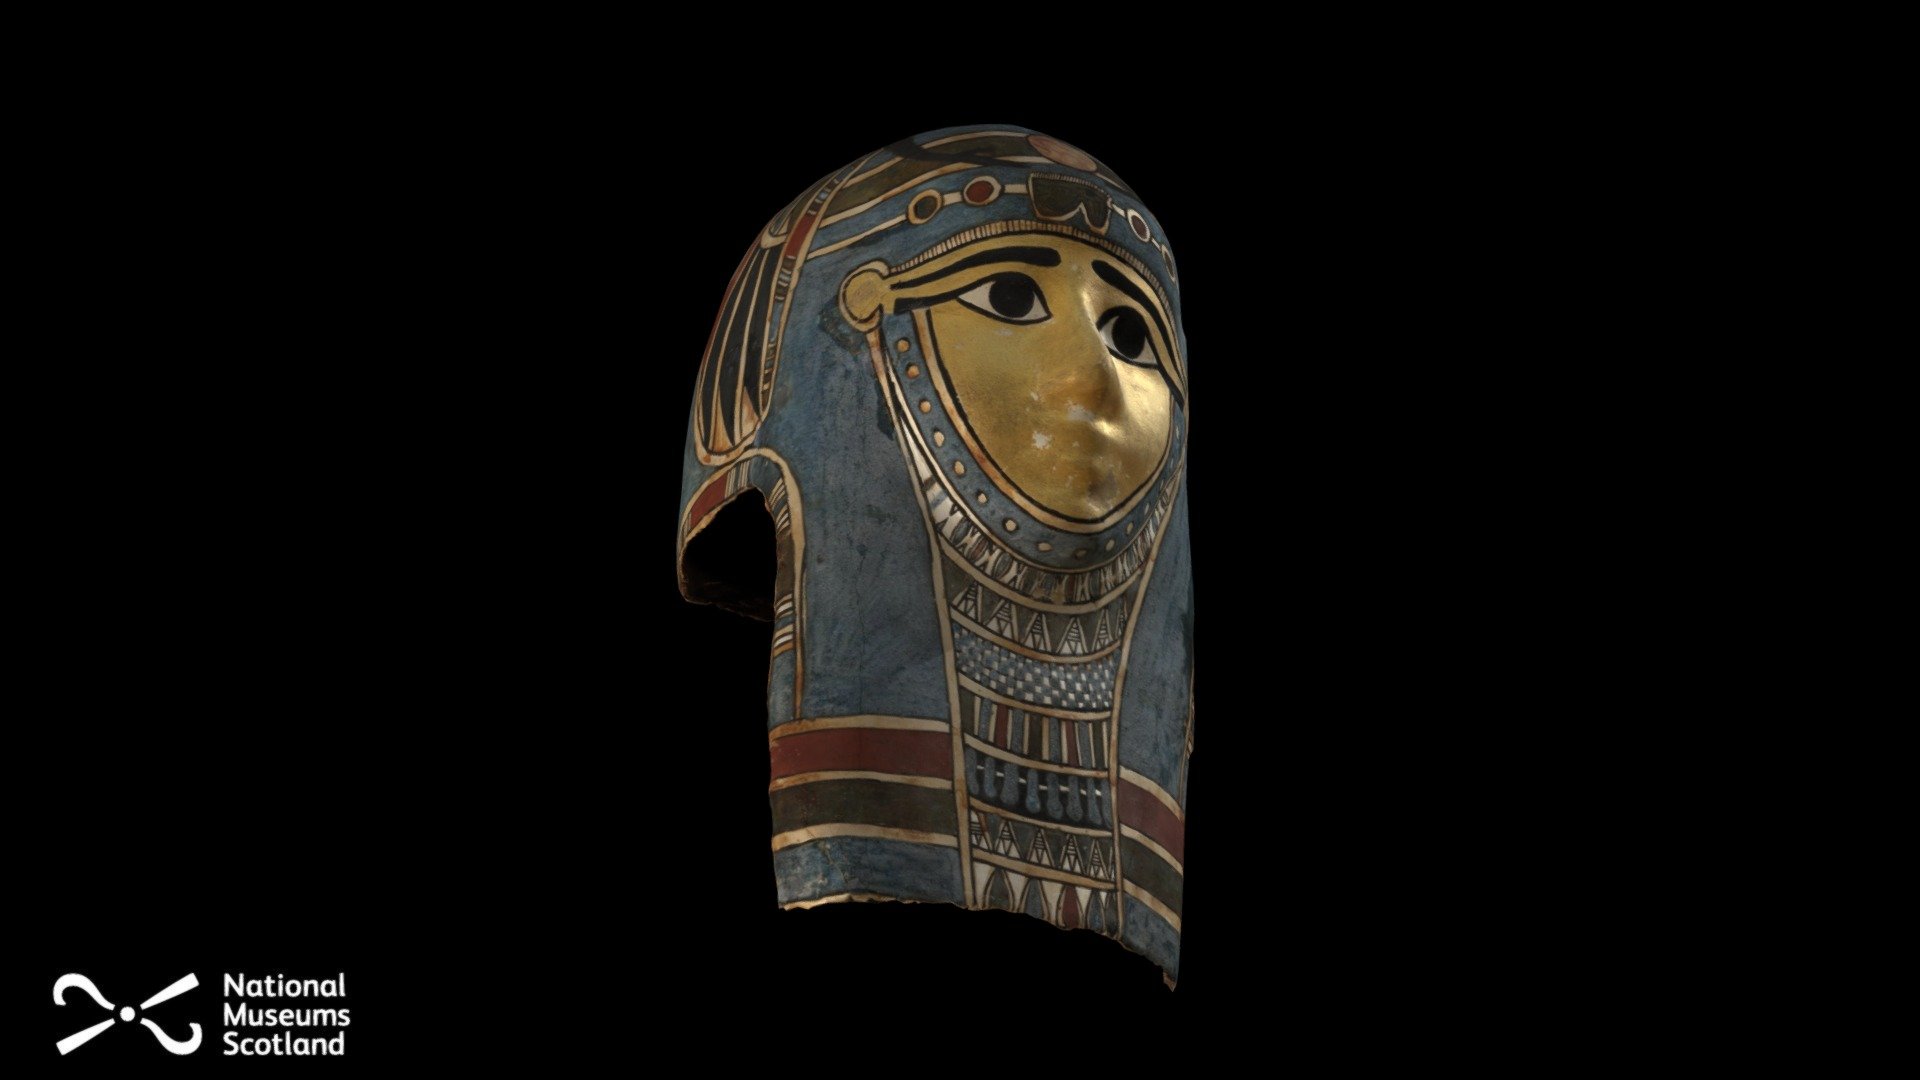 Mask from a complete cartonnage consisting of mask and three breast pieces. Excavated by the Egypt Exploration Society at Abydos. Ancient Egyptian, dating to the Ptolemaic period, 323-30 BC. The gold colouring reflects the ancient Egyptian belief that that god’s skin was made from that material. Other symbols of rebirth after death include the winged scarab beetle, show on the top of the head.

Museum reference A.1912.157 C

Collection World Cultures

Object name Cartonnage mask

Date 323 - 30 BC

Style / Culture Ptolemaic Period, Ancient Egyptian

Materials Cartonnage

Collection place Abydos, Upper Egypt, ANCIENT EGYPT

Discover more about Ancient Egypt on the National Museums Scotland website.

Photogrammetry by Thomas Flynn / Sketchfab for National Museums Scotland 3d model